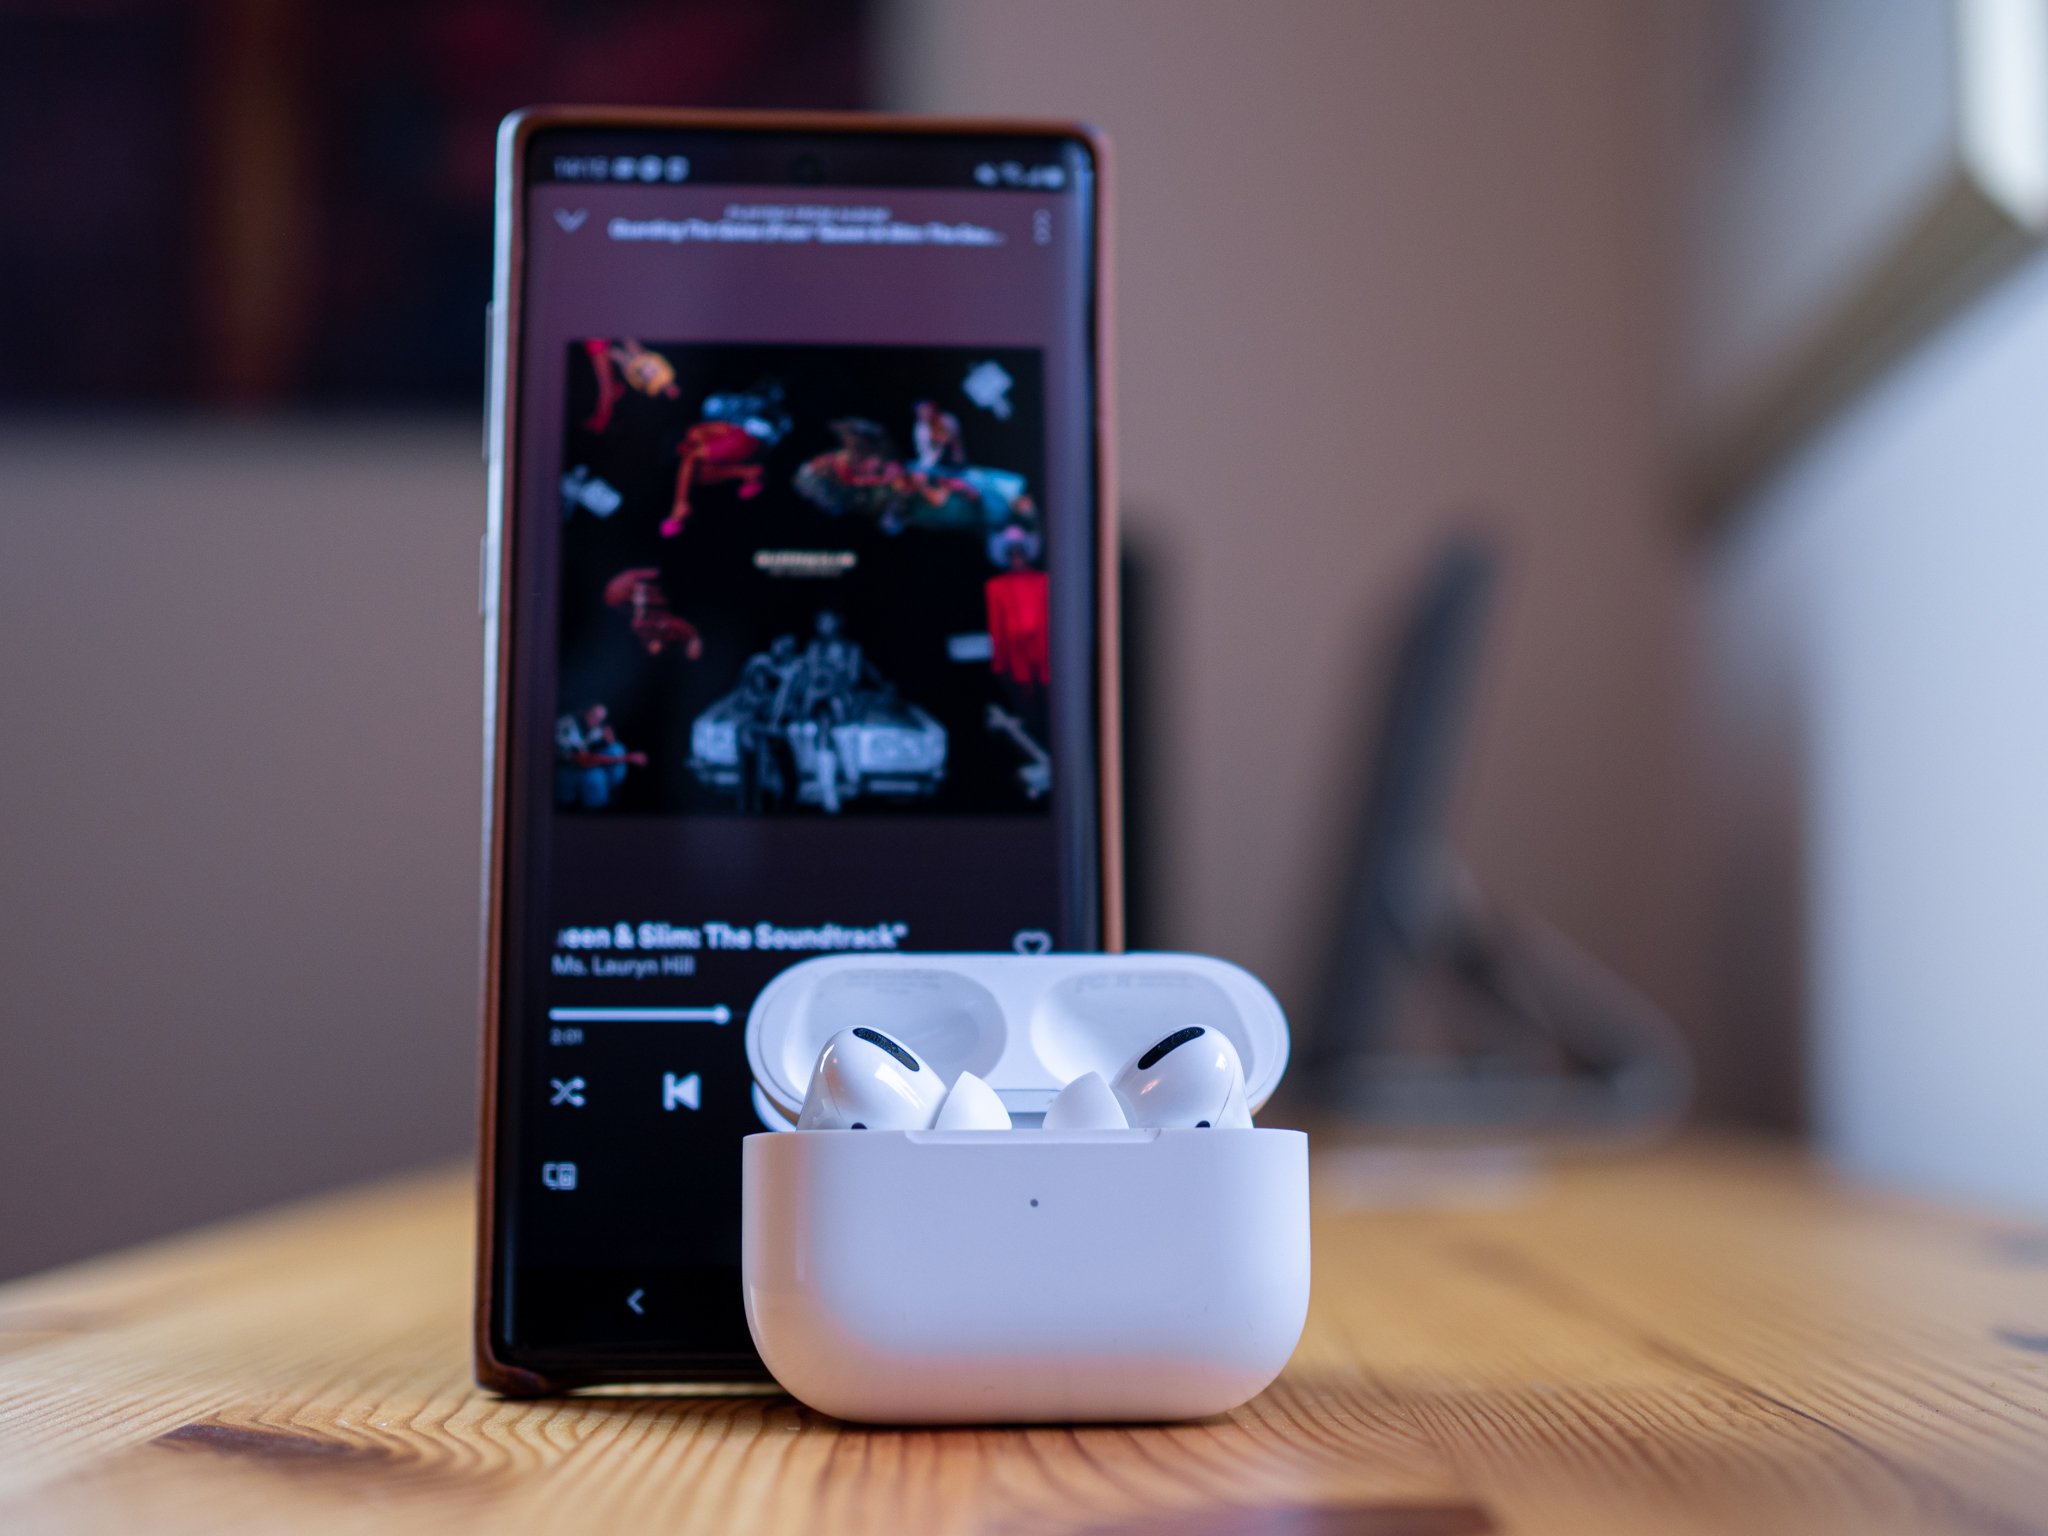 Are AirPods a good earbud choice for Android users?